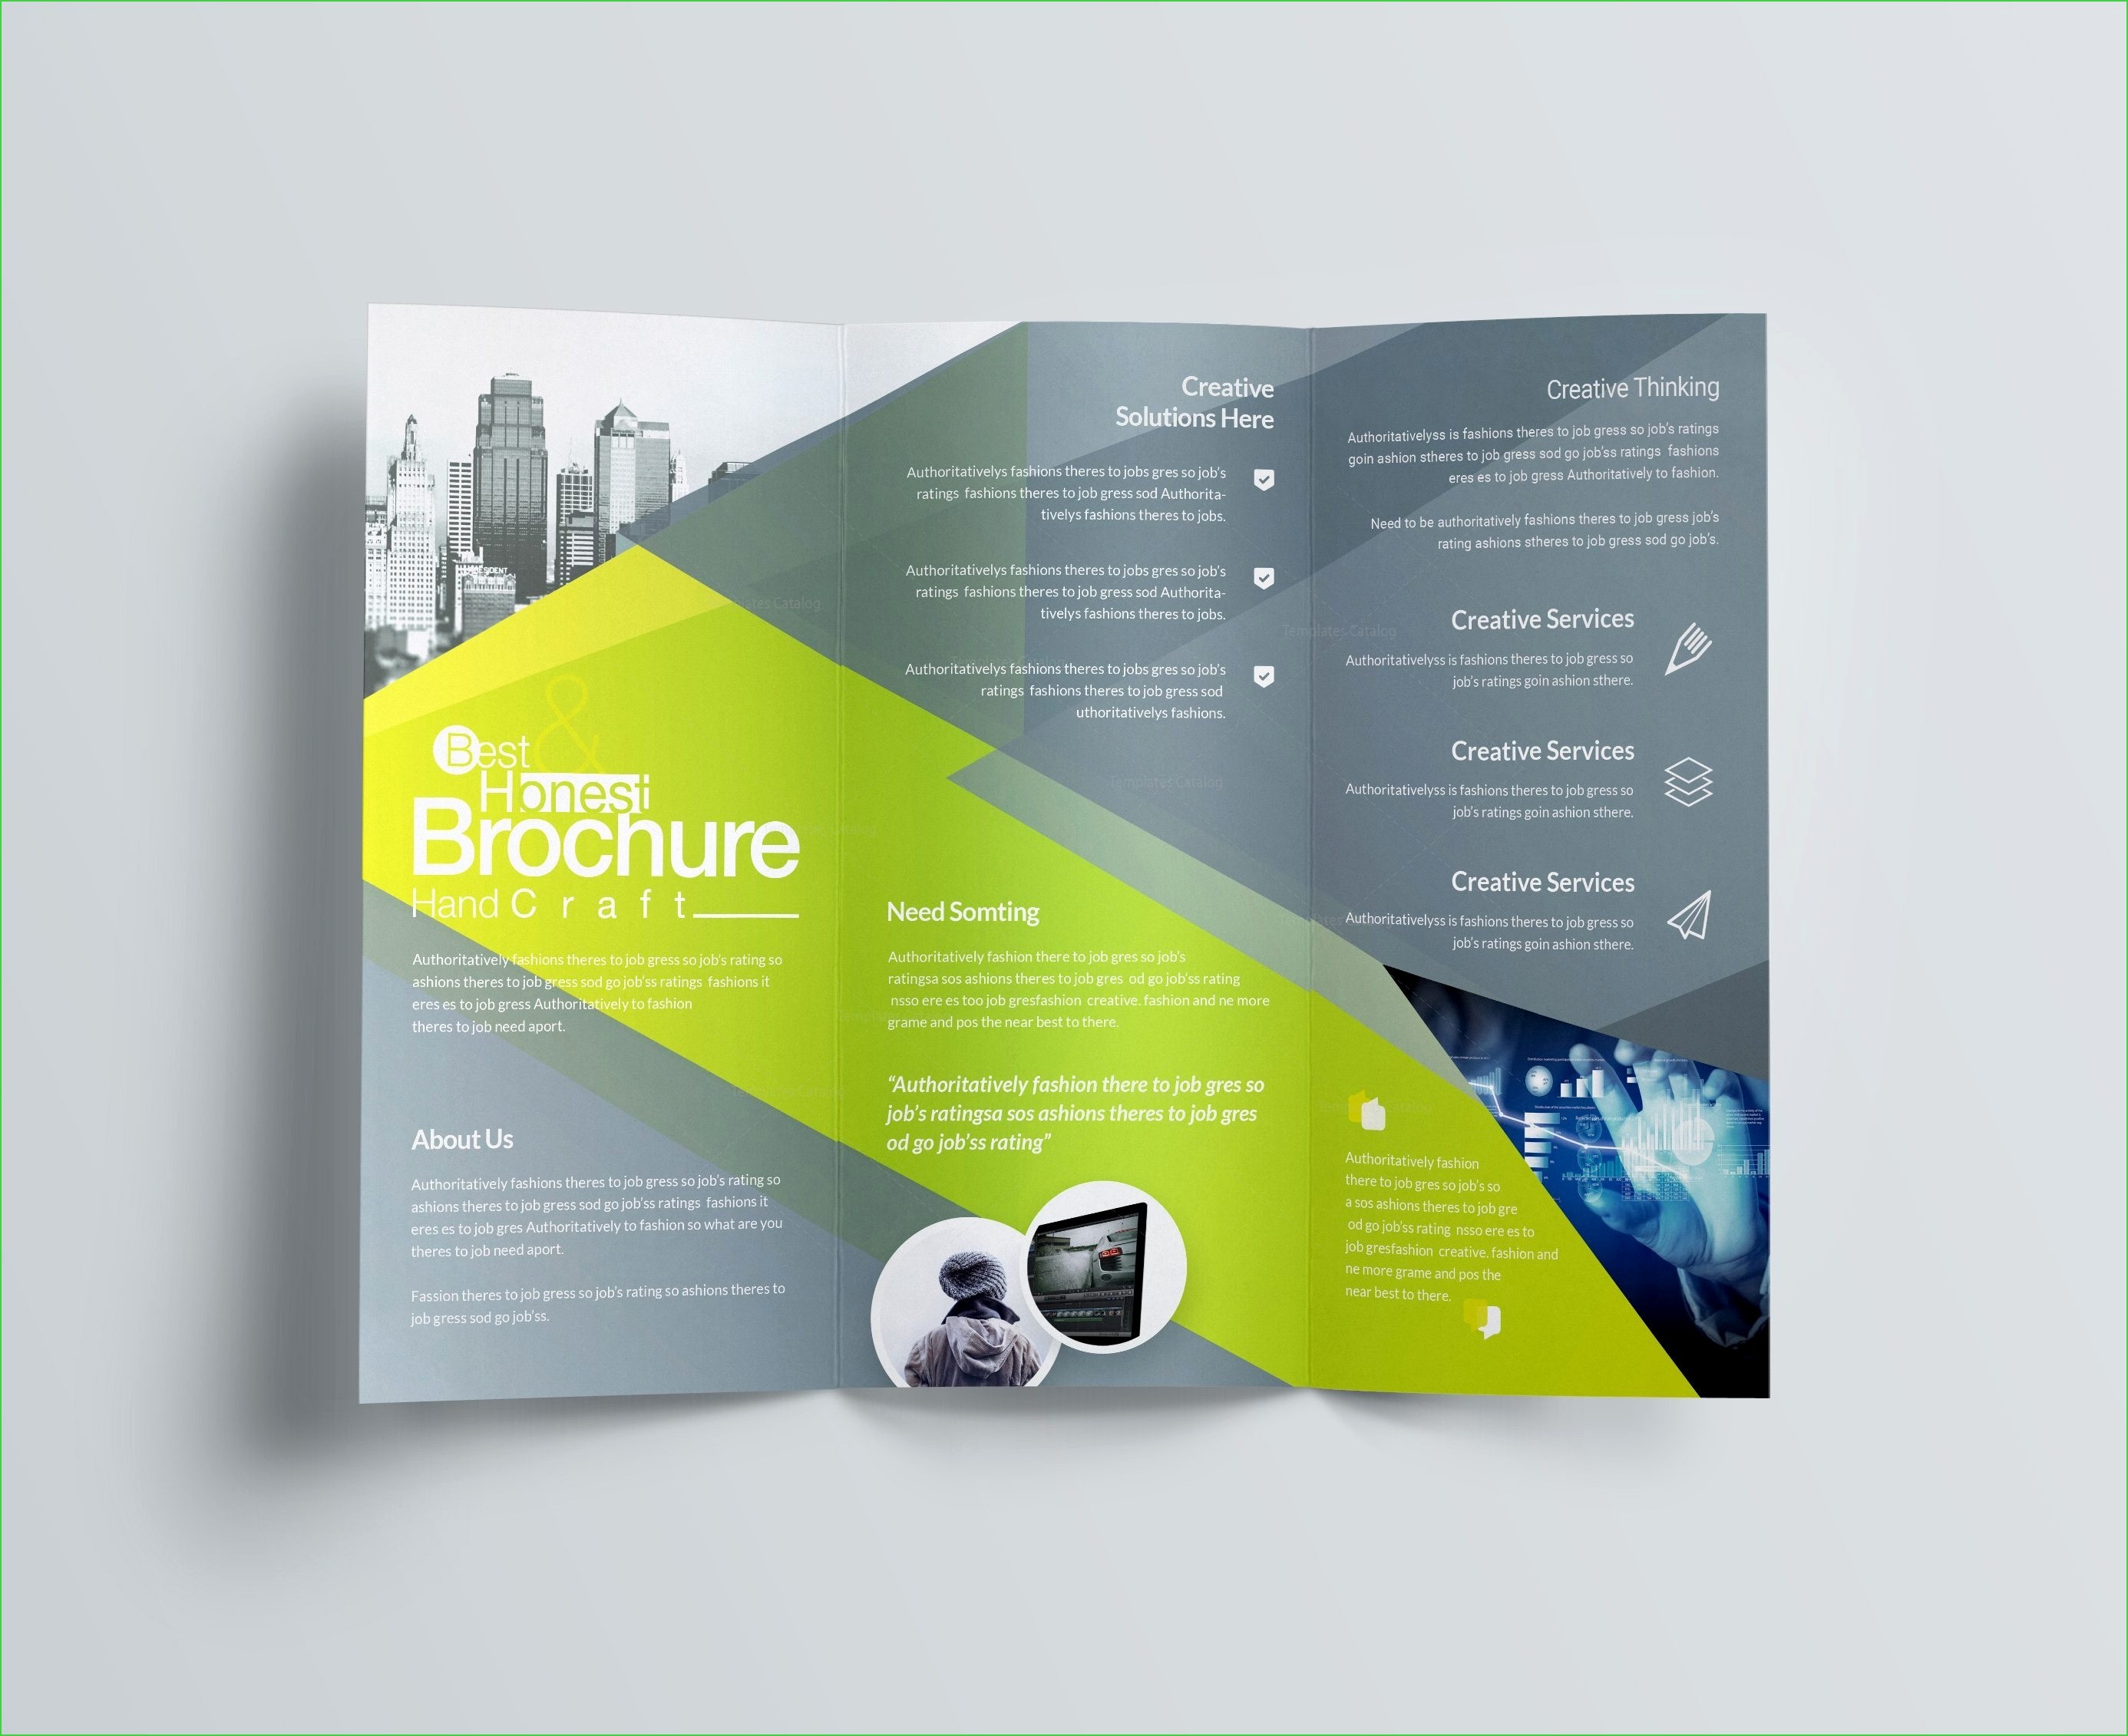 Managed Services Brochure Template carlynstudio us